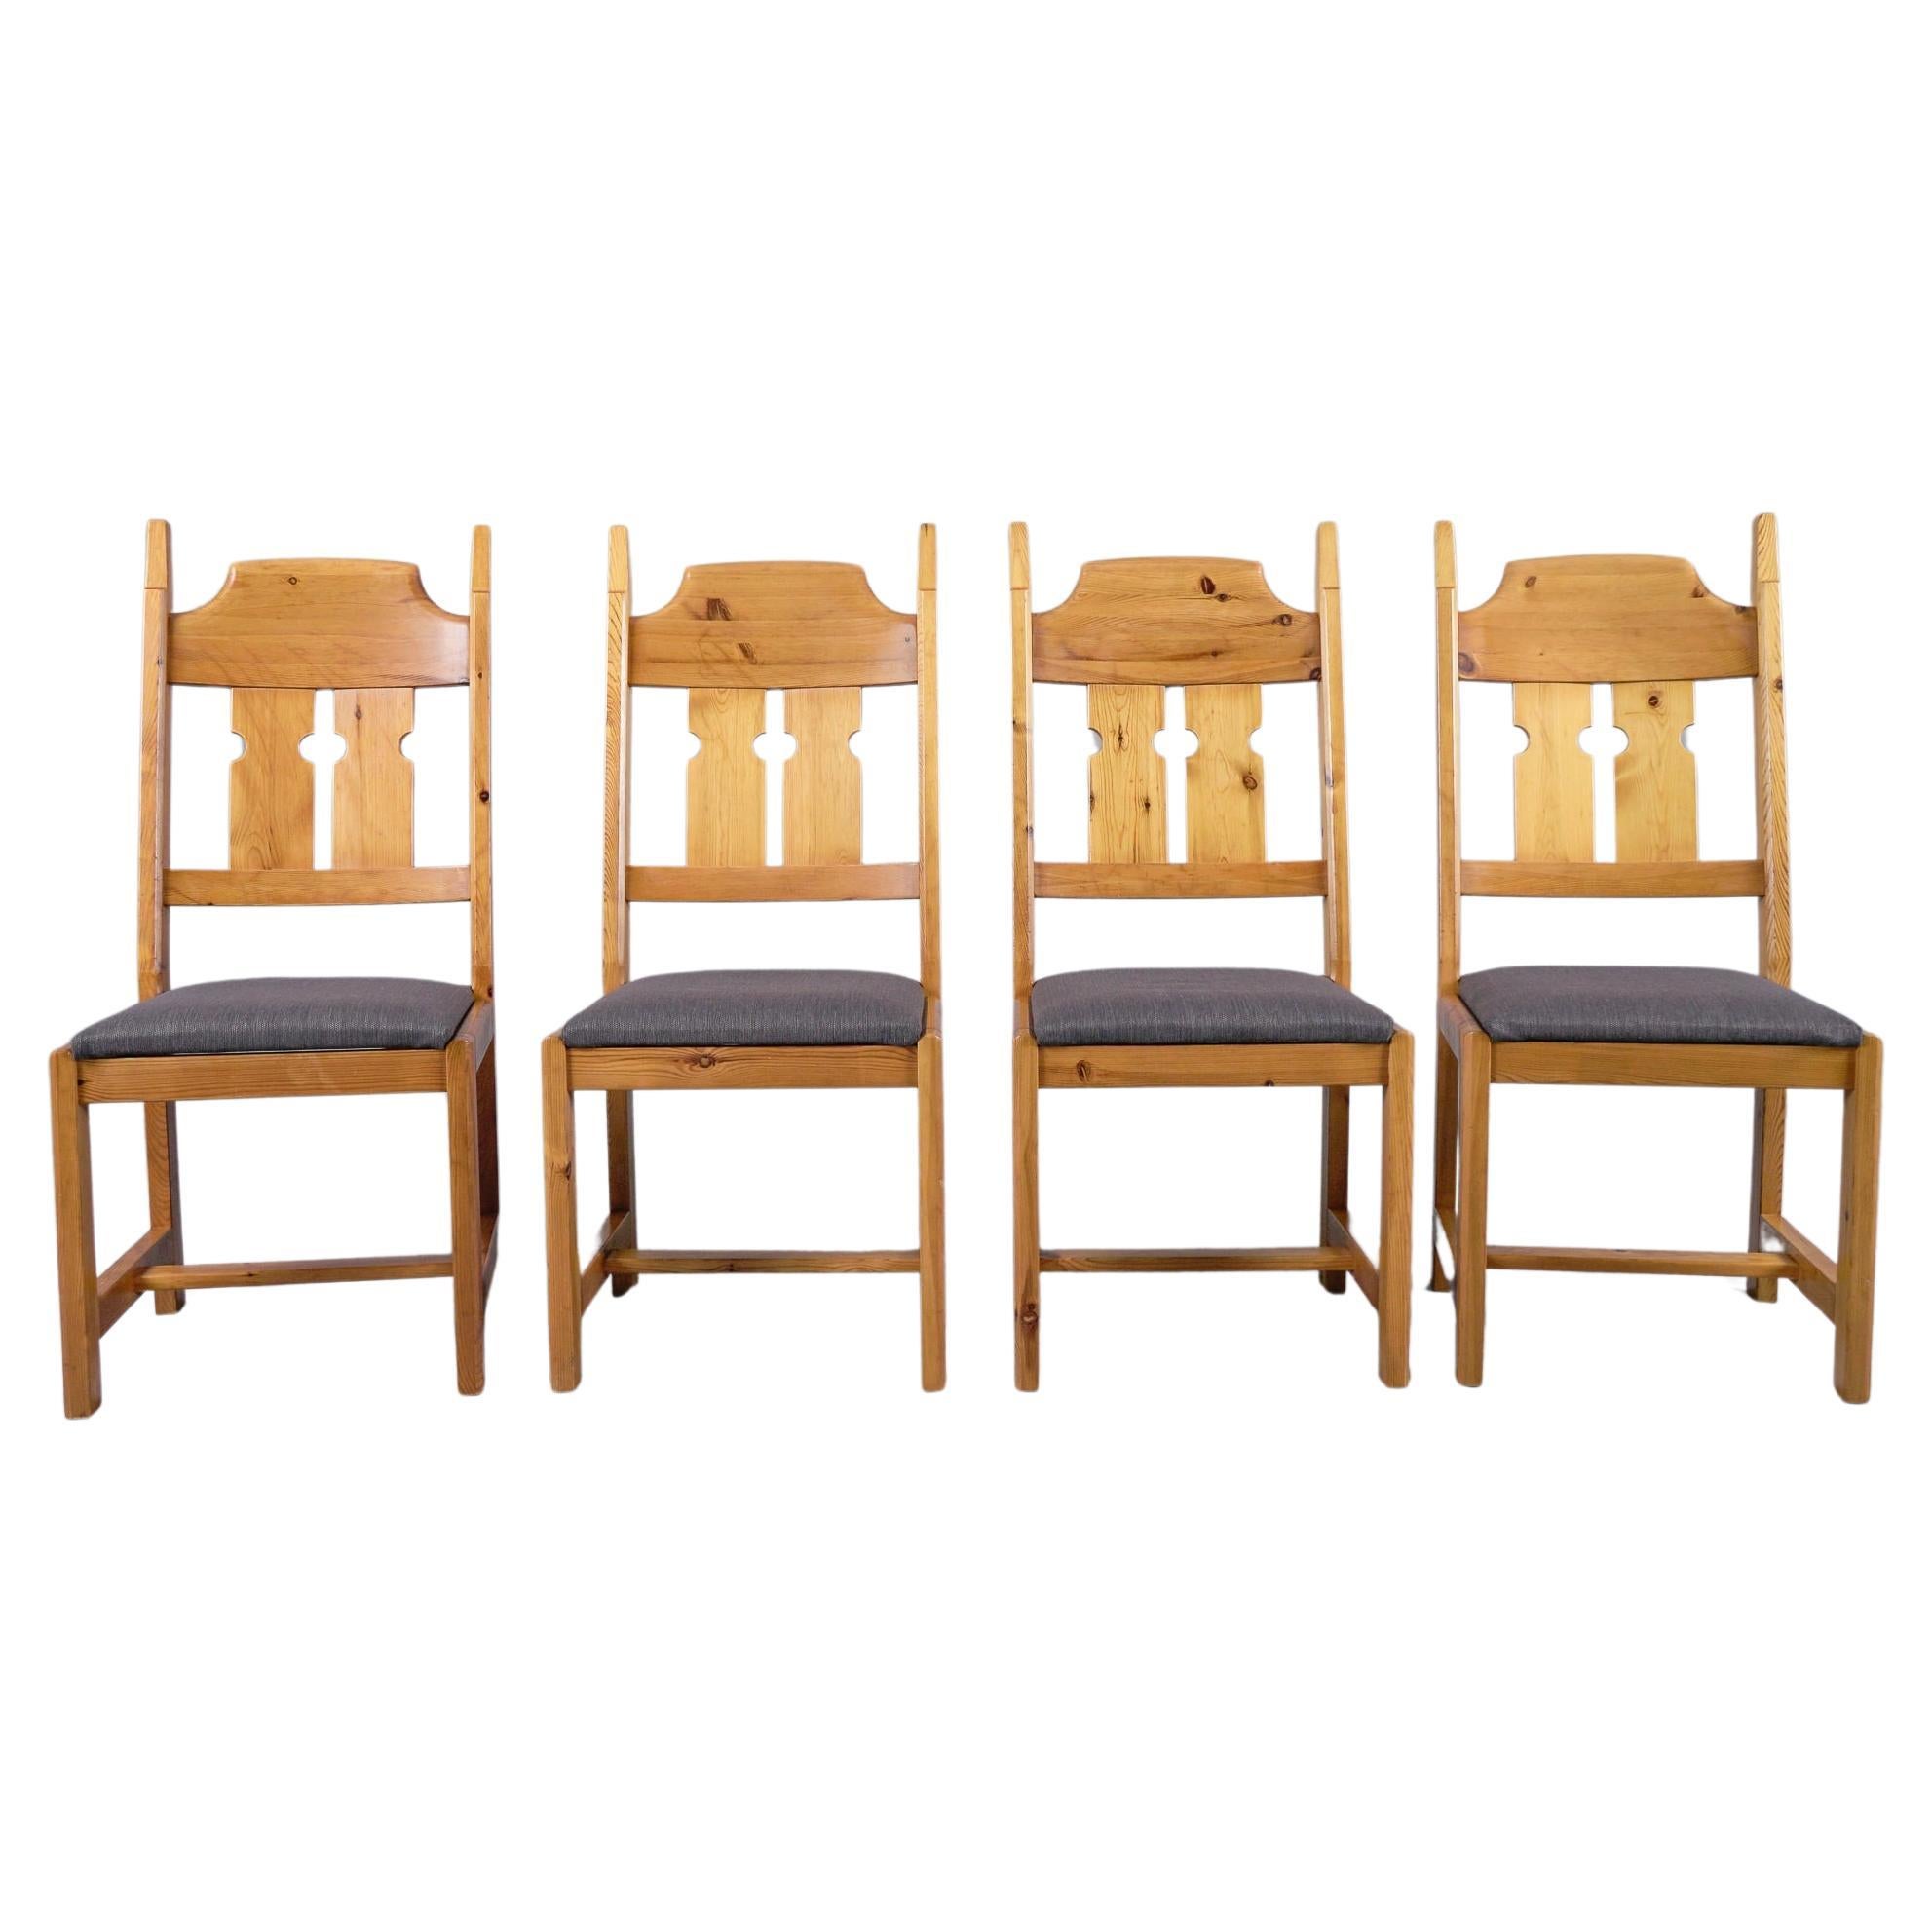  Set of 4 Swedish Pine Chairs by Gilbert Marklund for Furusnickarn AB, 1970s